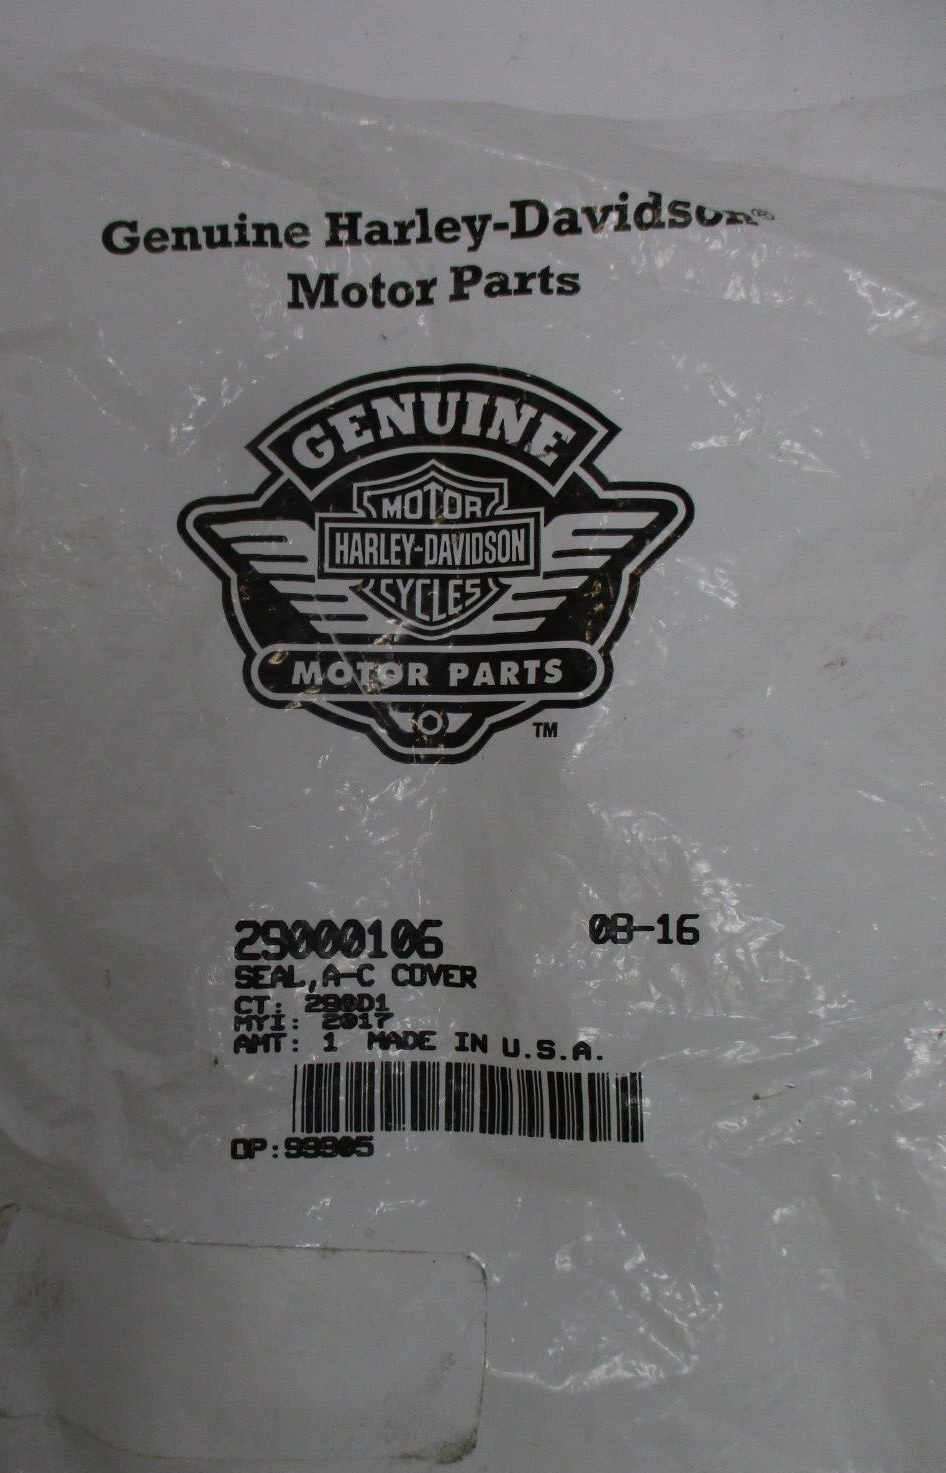 Harley-Davidson Air Cleaner Seal Cover 29000106